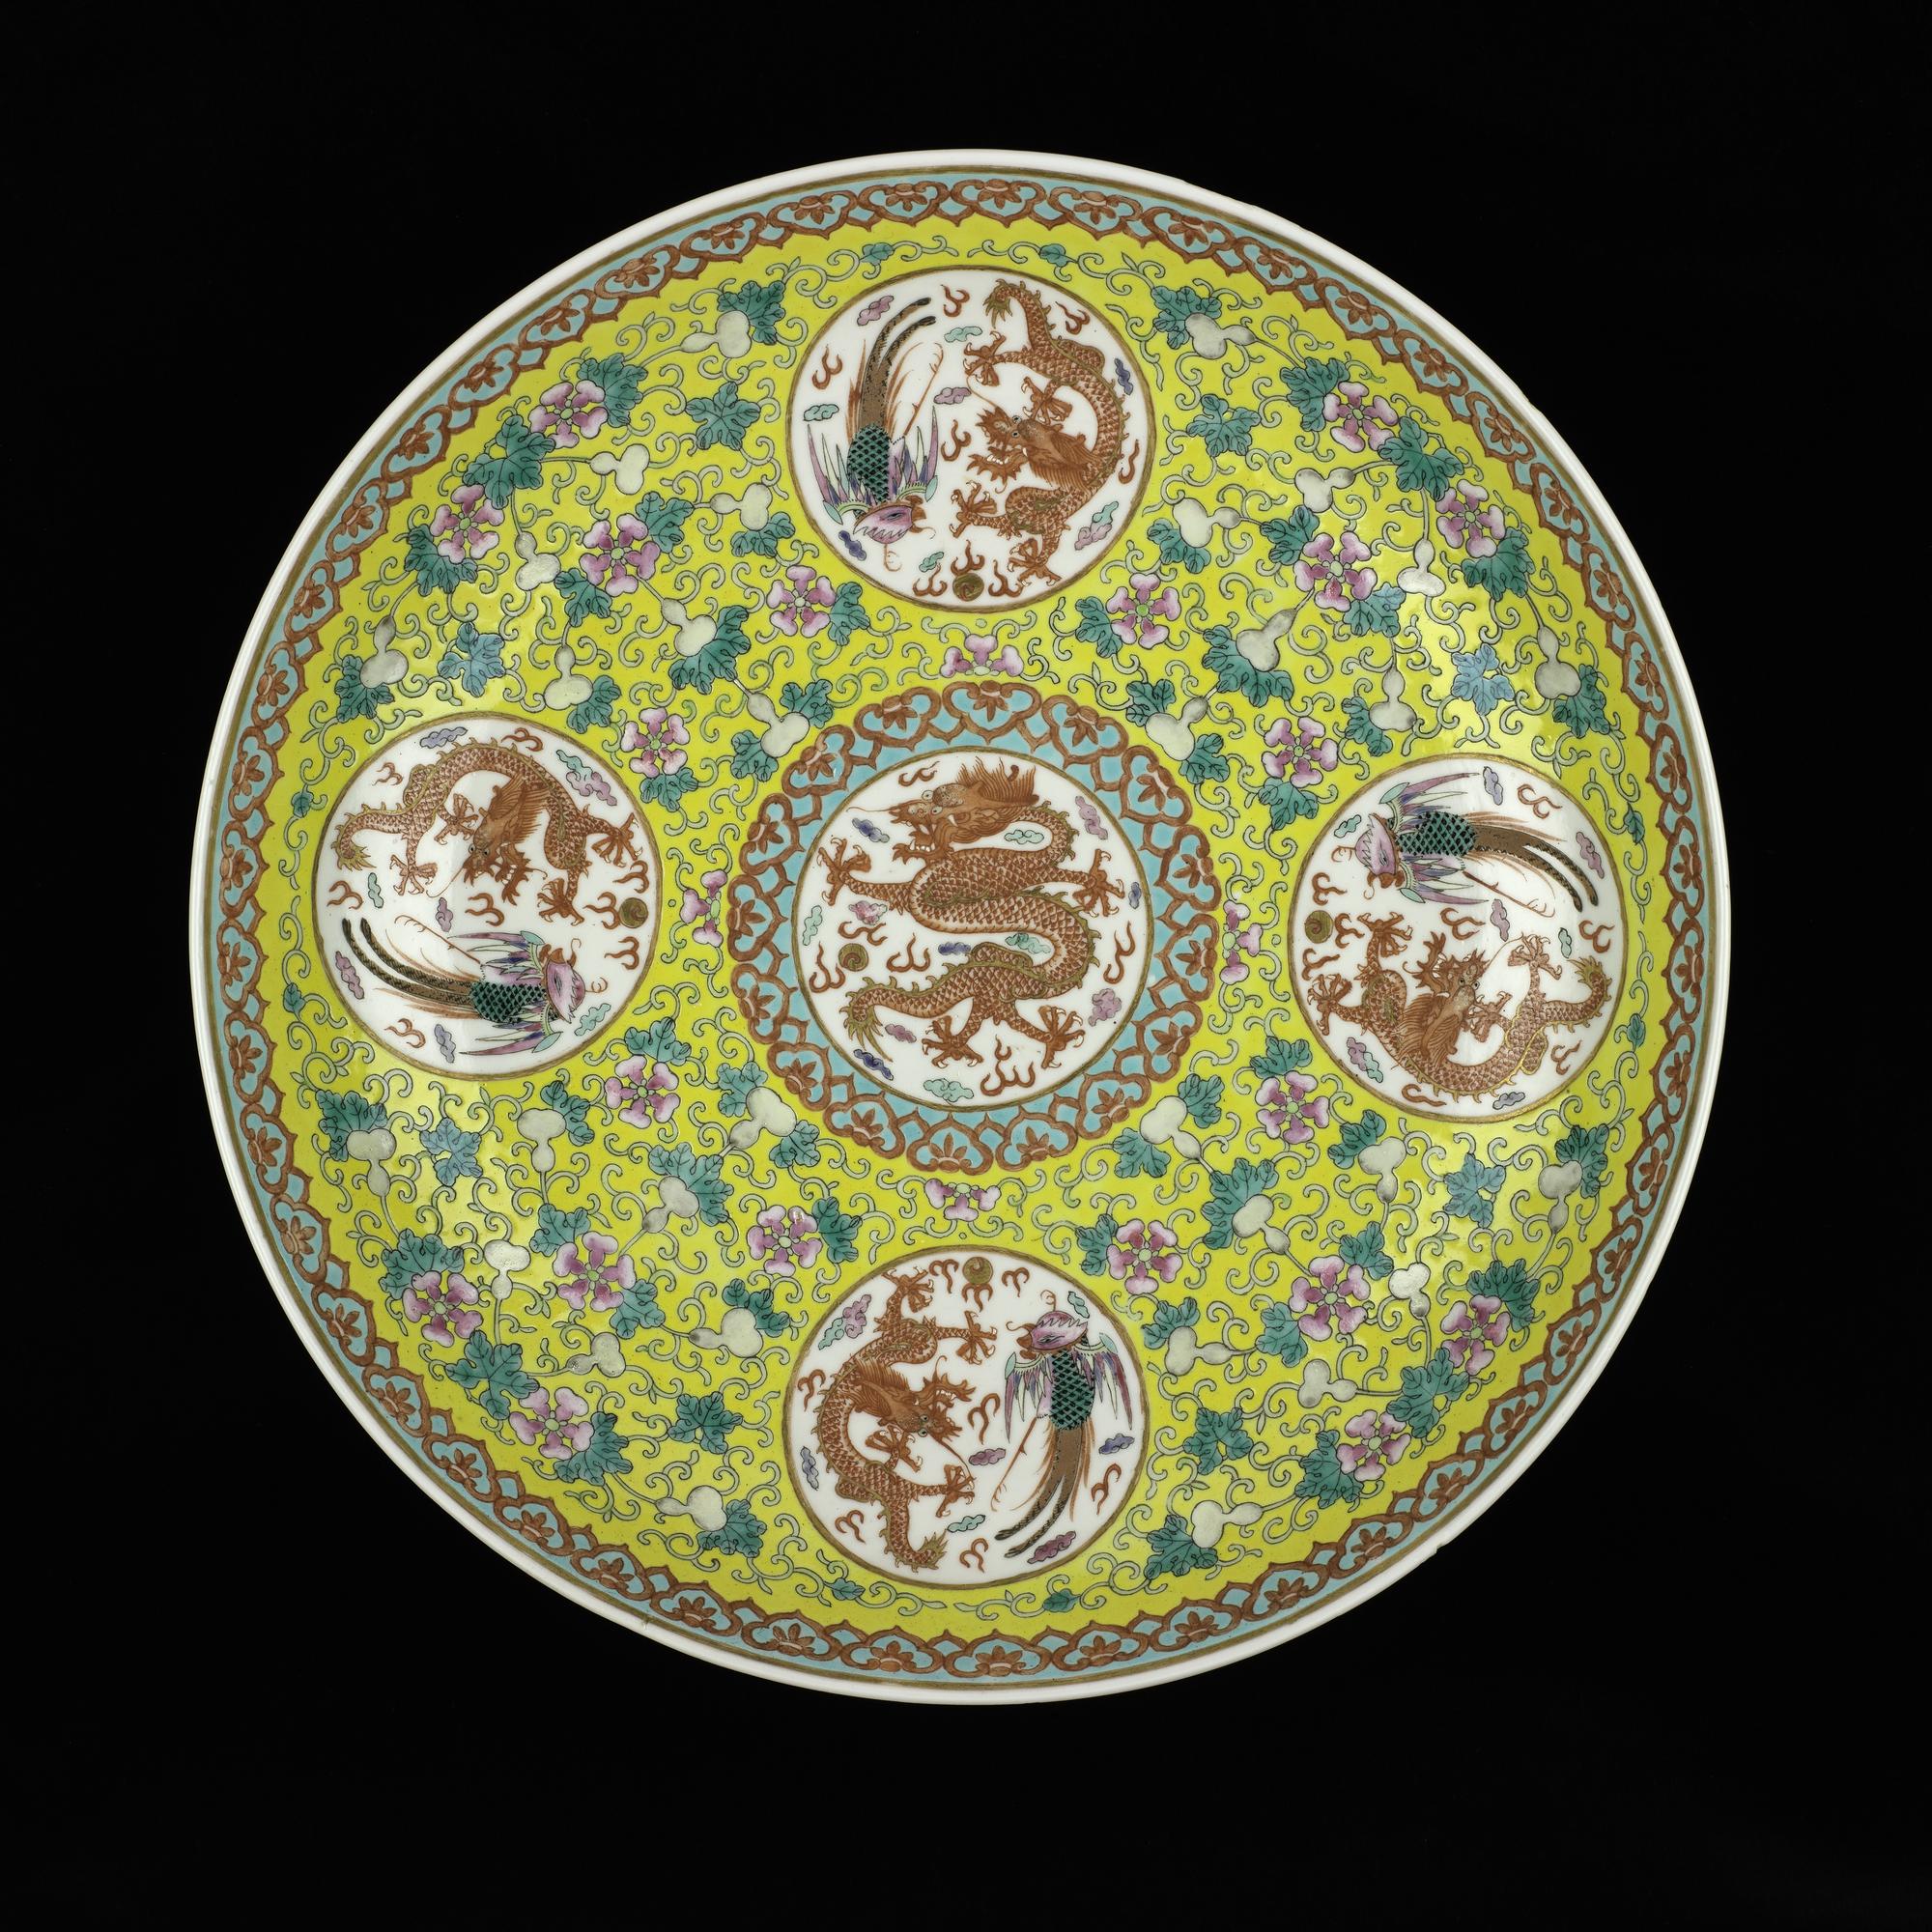 Circular porcelain dish, decorated in overglaze enamels on a yellow ground with a central roundel containing a red dragon and pearl, surrounded by four roundels each containing a red dragon and a phoenix, with a reign mark on the base: China, Qing Dynasty, Qianlong reign, 1736-1795 AD. 